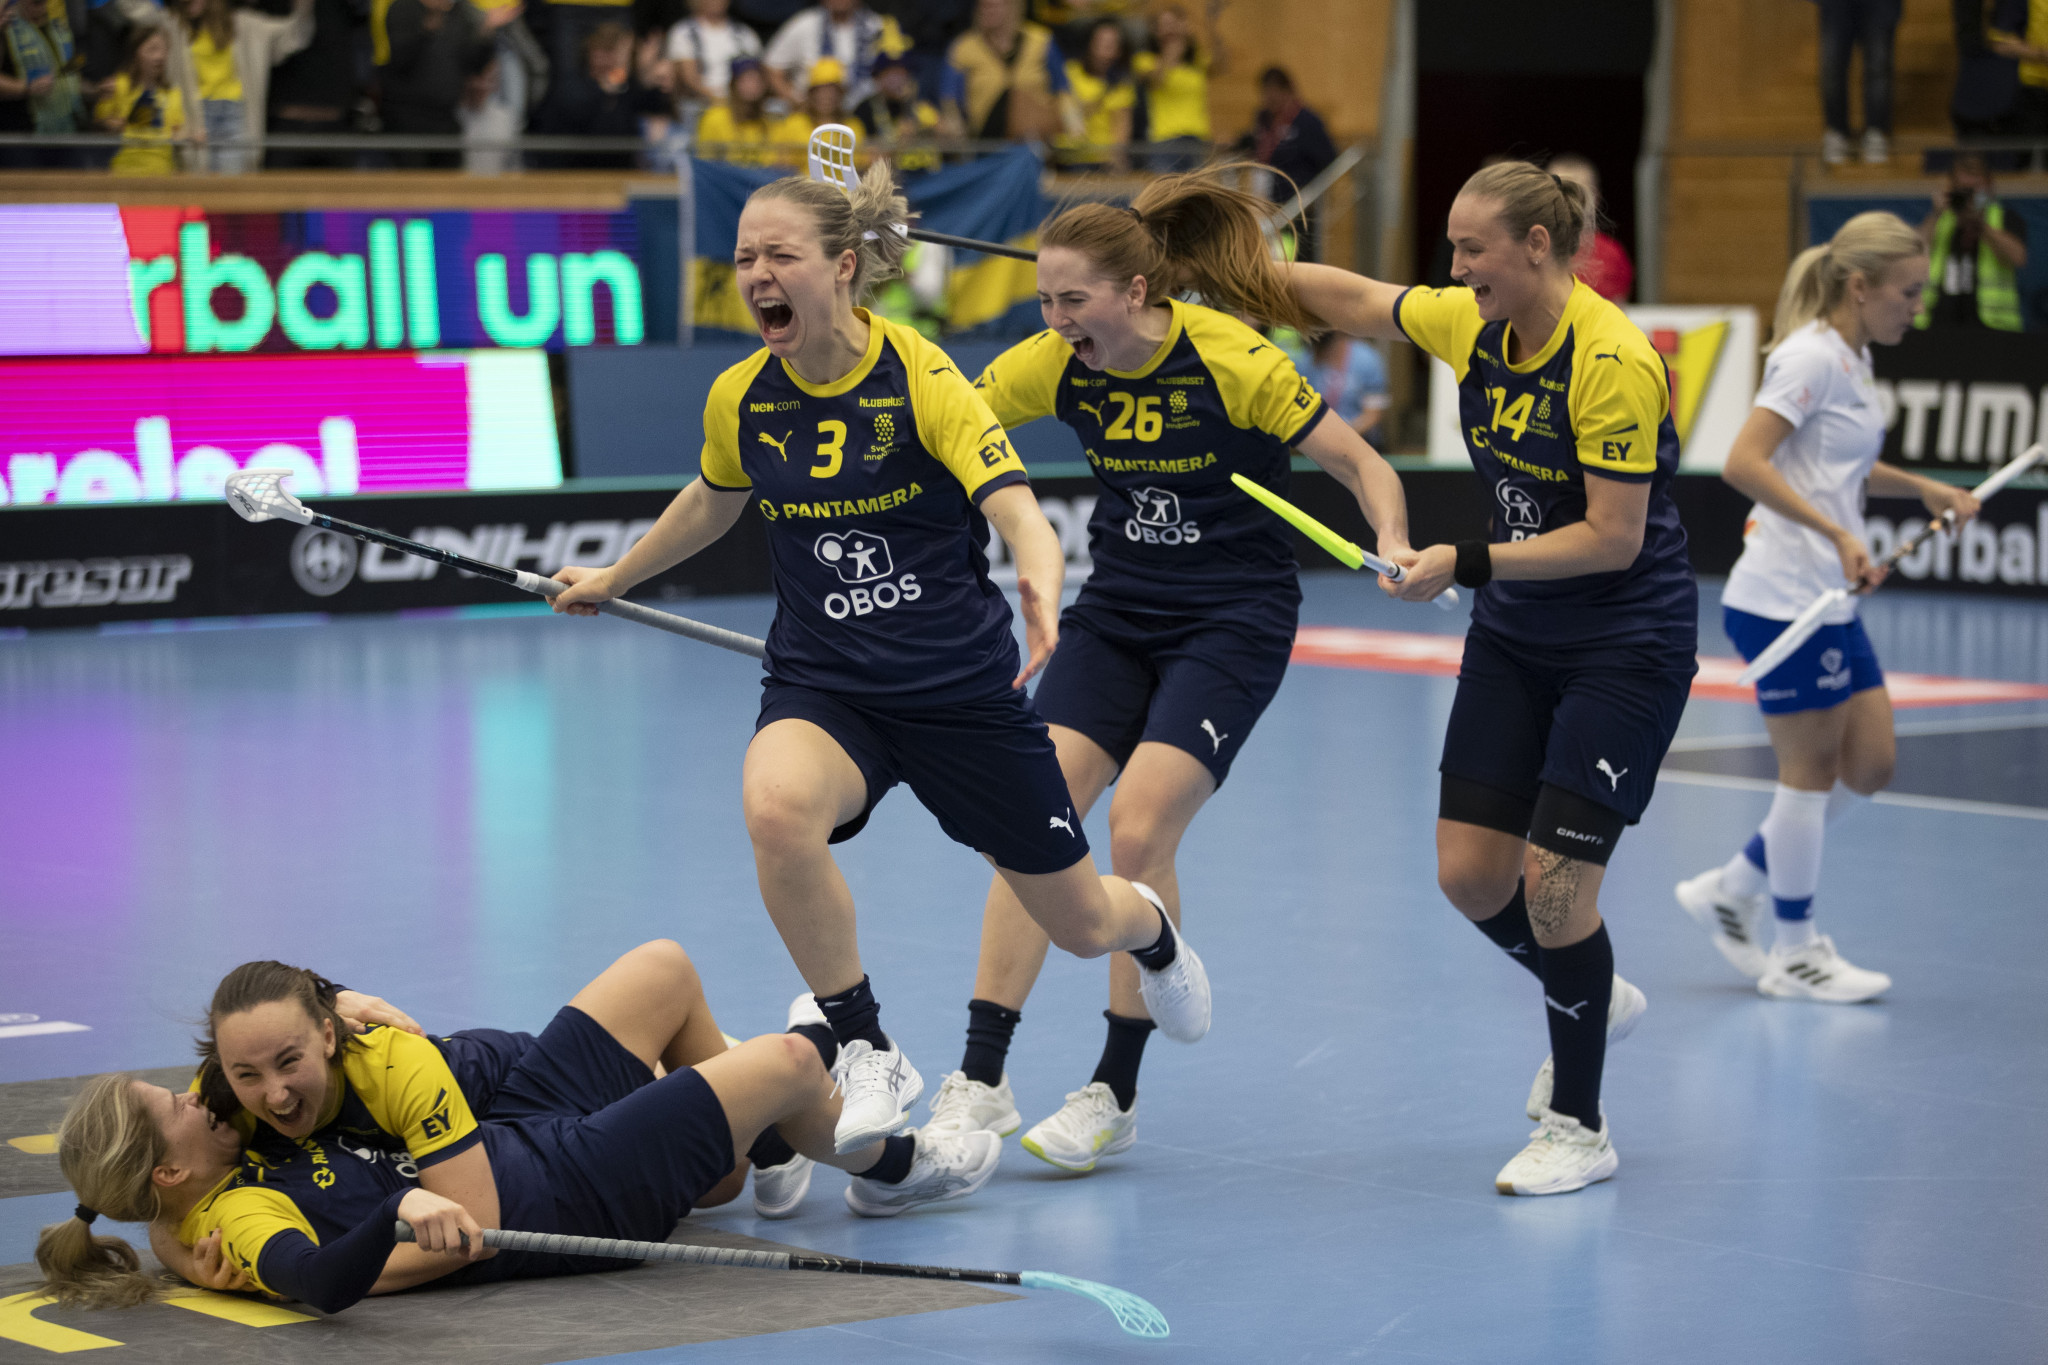 Hosts Sweden dramatically won the Women's World Floorball Championship in home soil in Uppsala with a golden goal victory against Finland ©International Floorball Federation